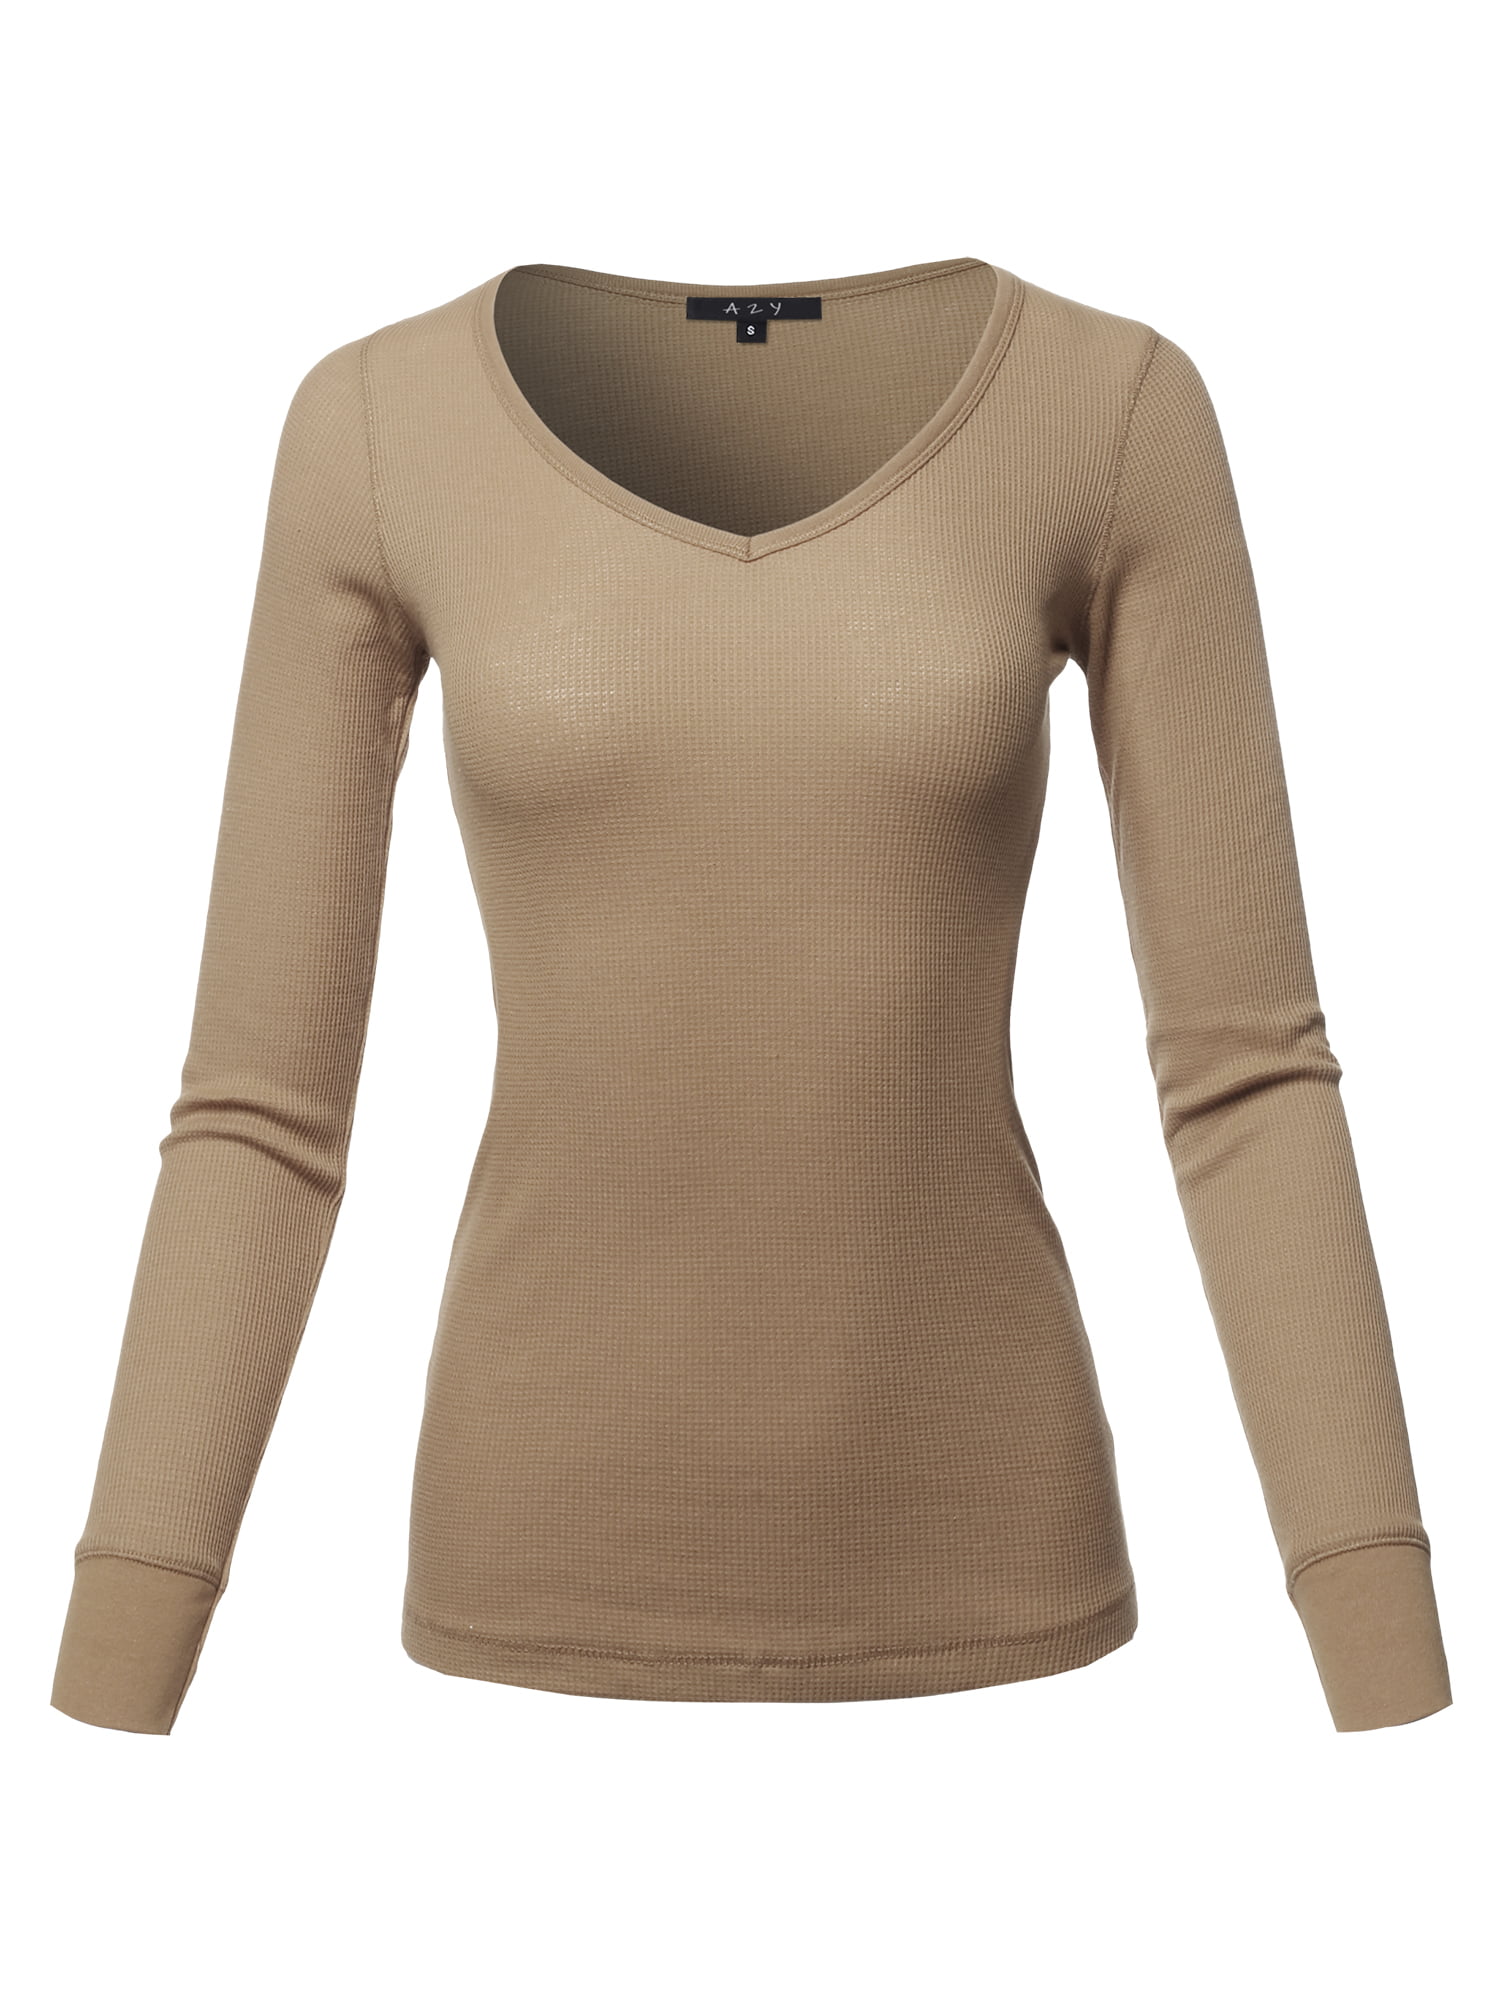 A2y A2y Womens Basic Solid Long Sleeve V Neck Fitted Thermal Top Shirt Khaki L 